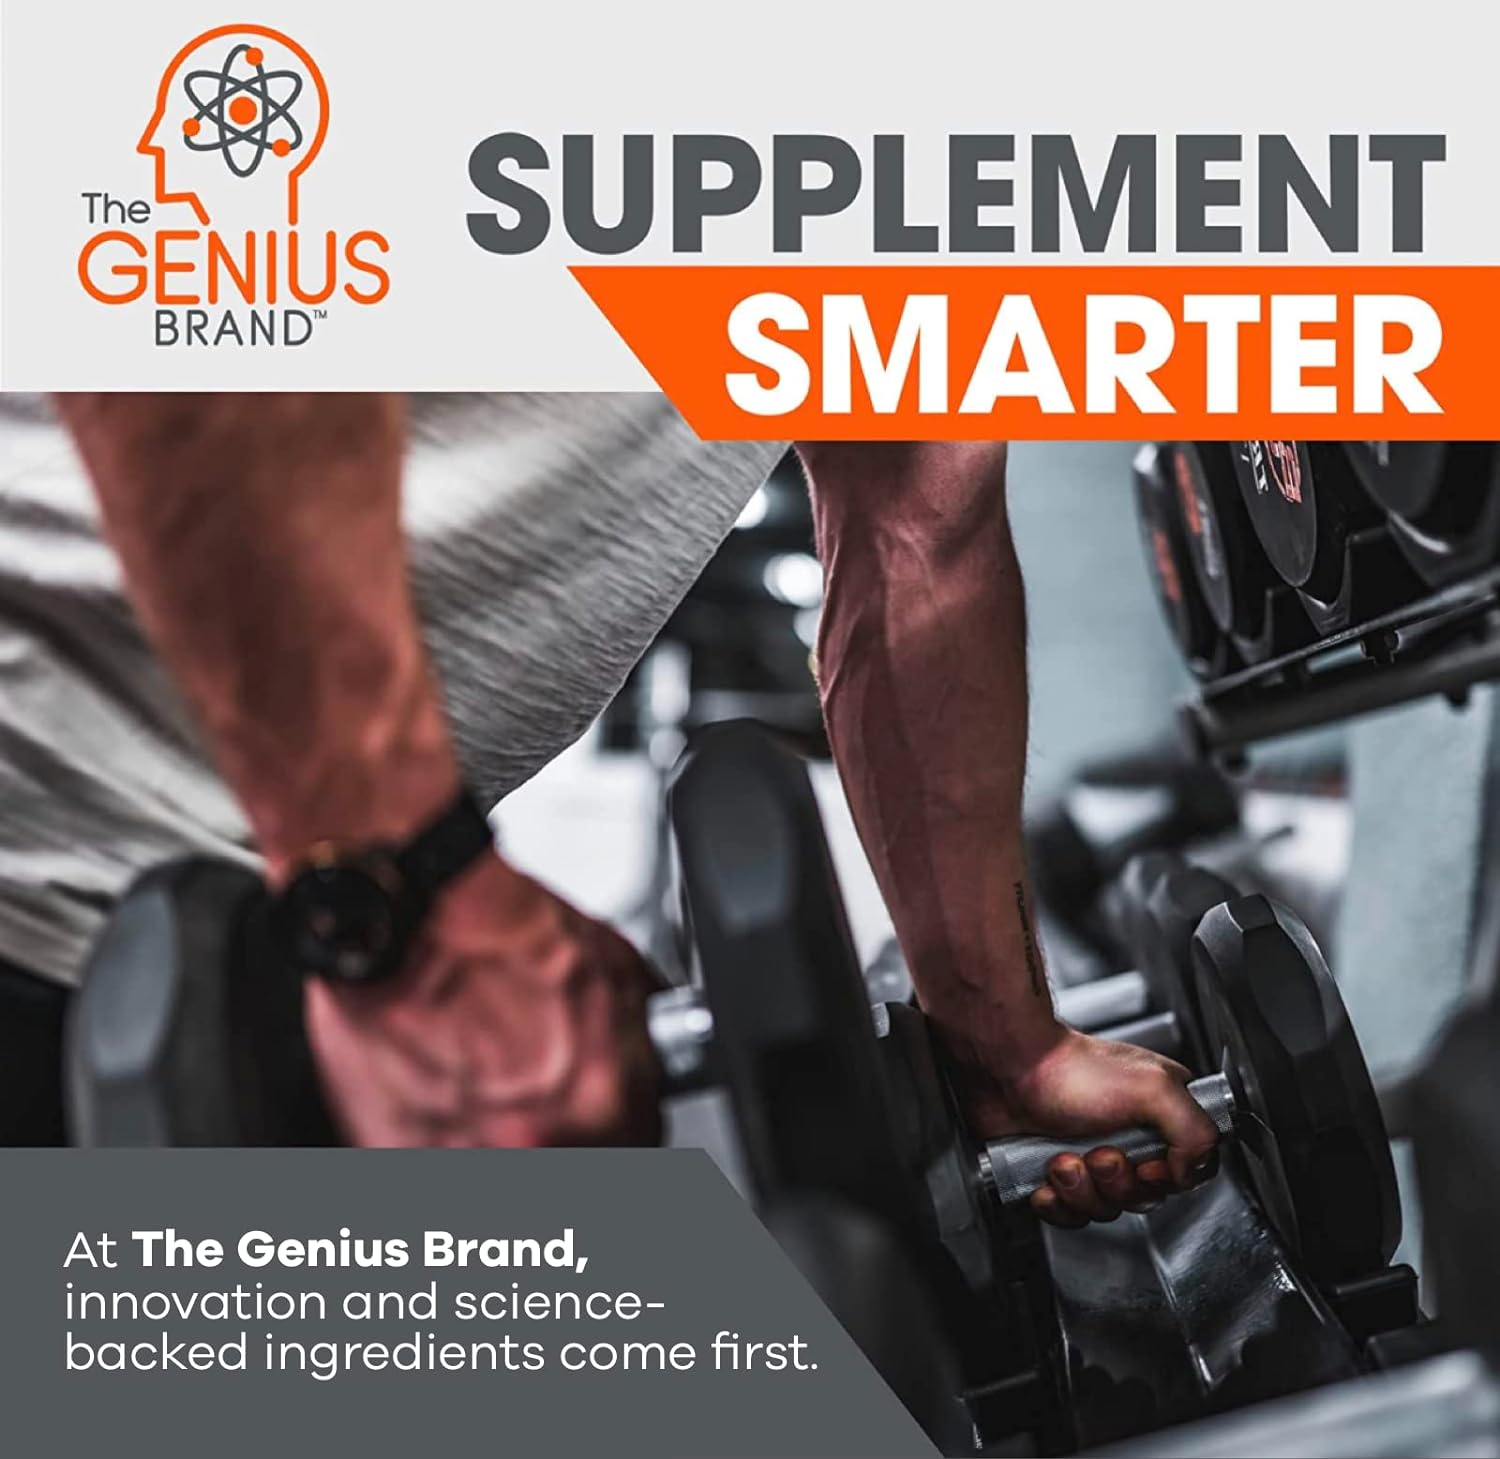 Genius Pre Workout Powder, Sour Apple - All-Natural Nootropic Pre-Workout & Caffeine-Free Nitric Oxide Booster Supplement with Beta Alanine & Alpha GPC - No Artificial Flavors, Sweeteners, or Dyes